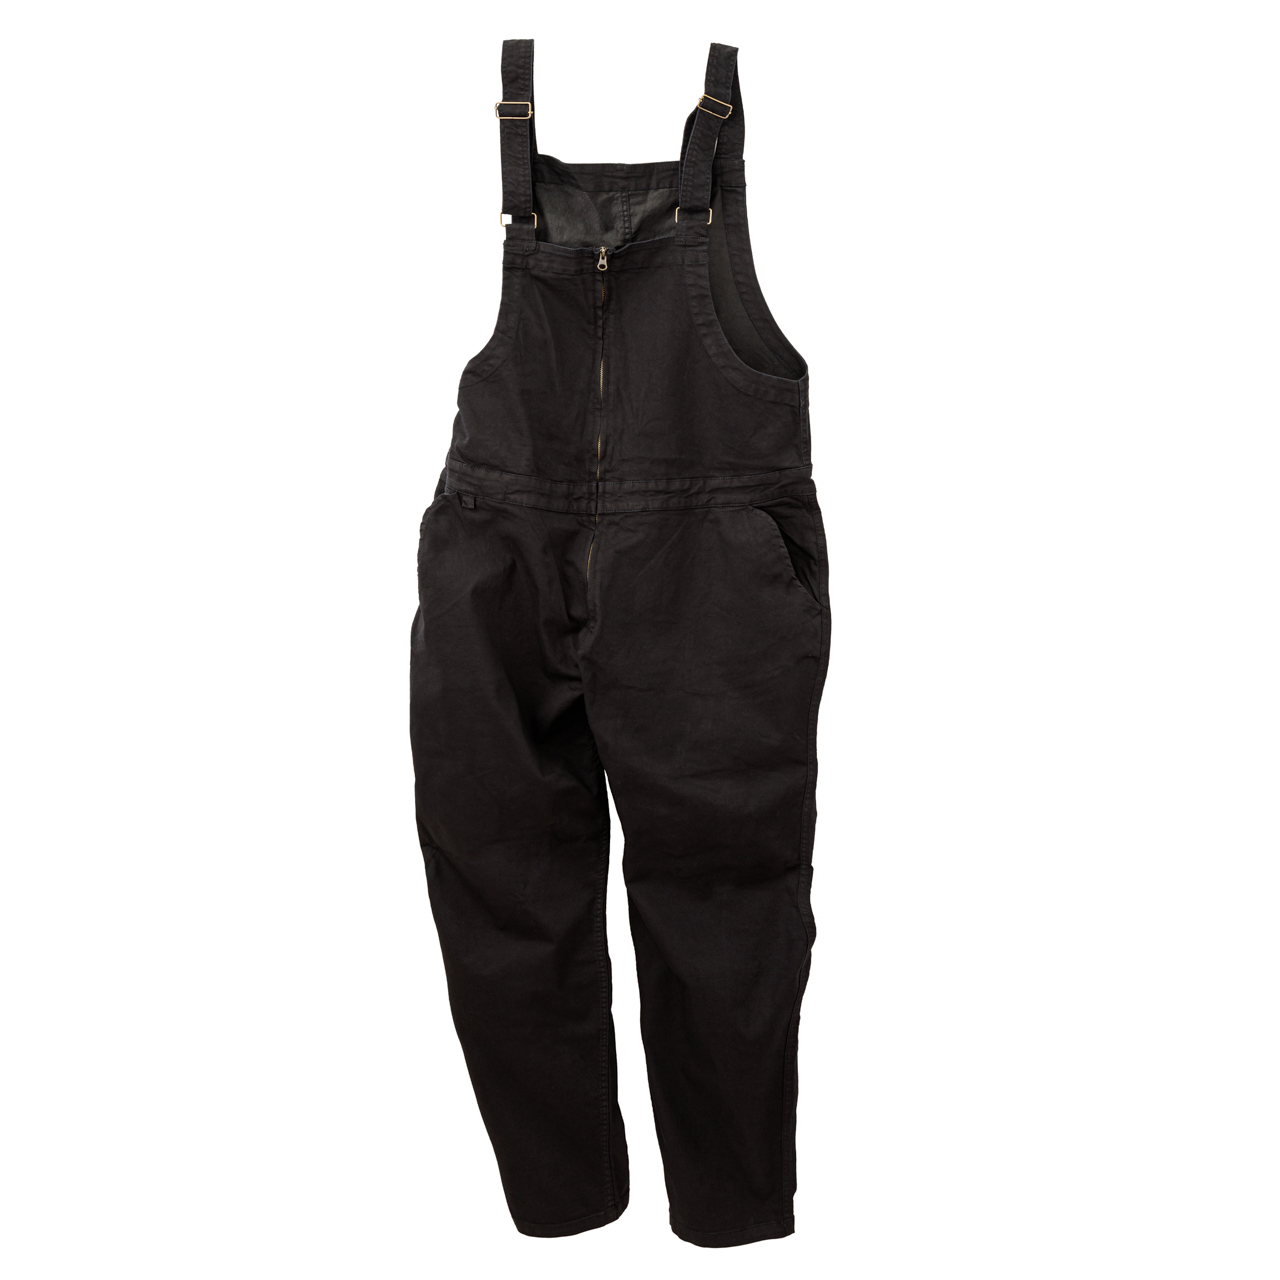 Stretch Zip Overall